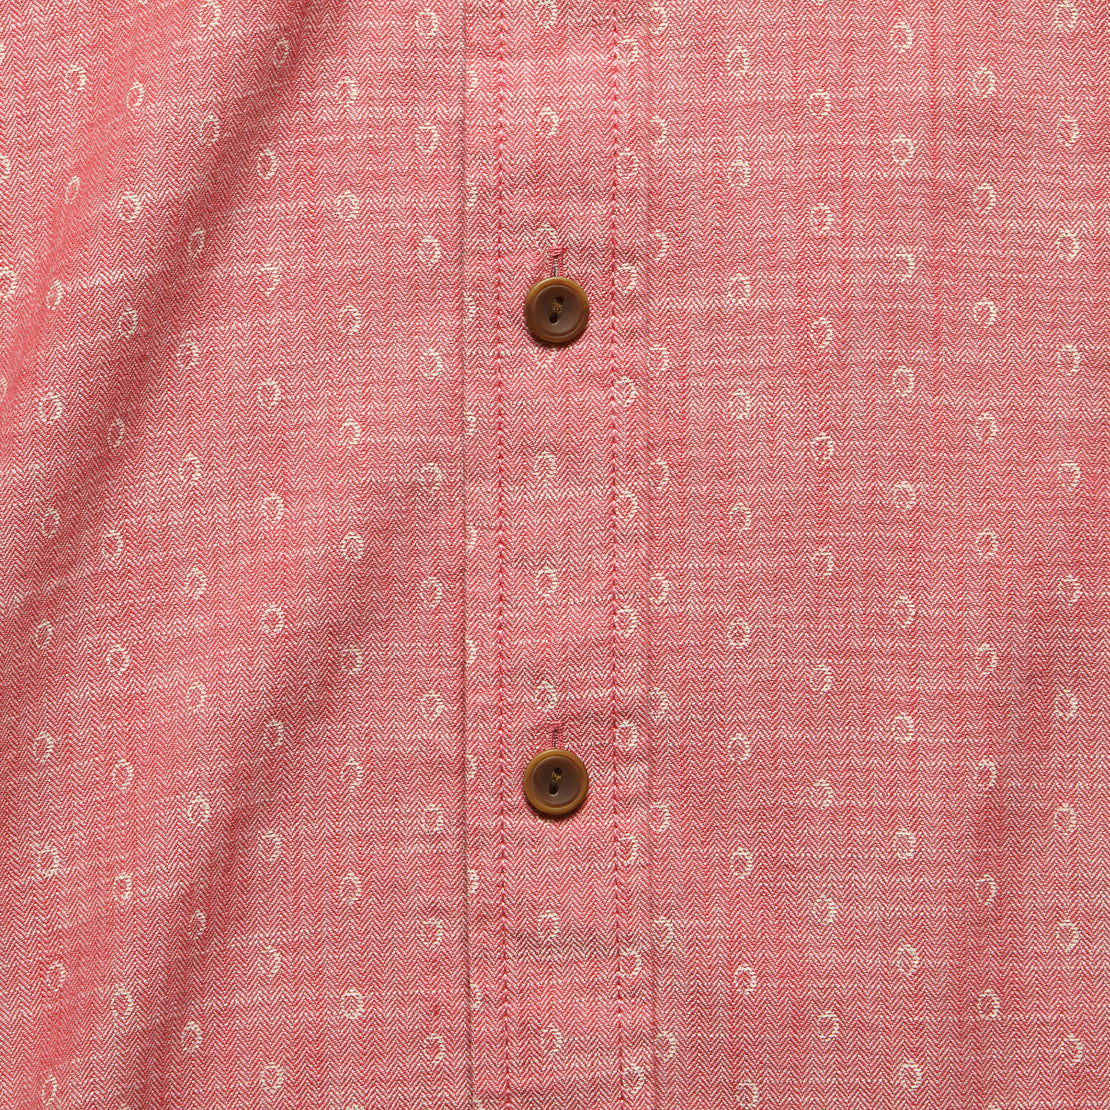 Falling Oval Print Herringbone Shirt - Cranberry/White - Grayers - STAG Provisions - Tops - S/S Woven - Other Pattern